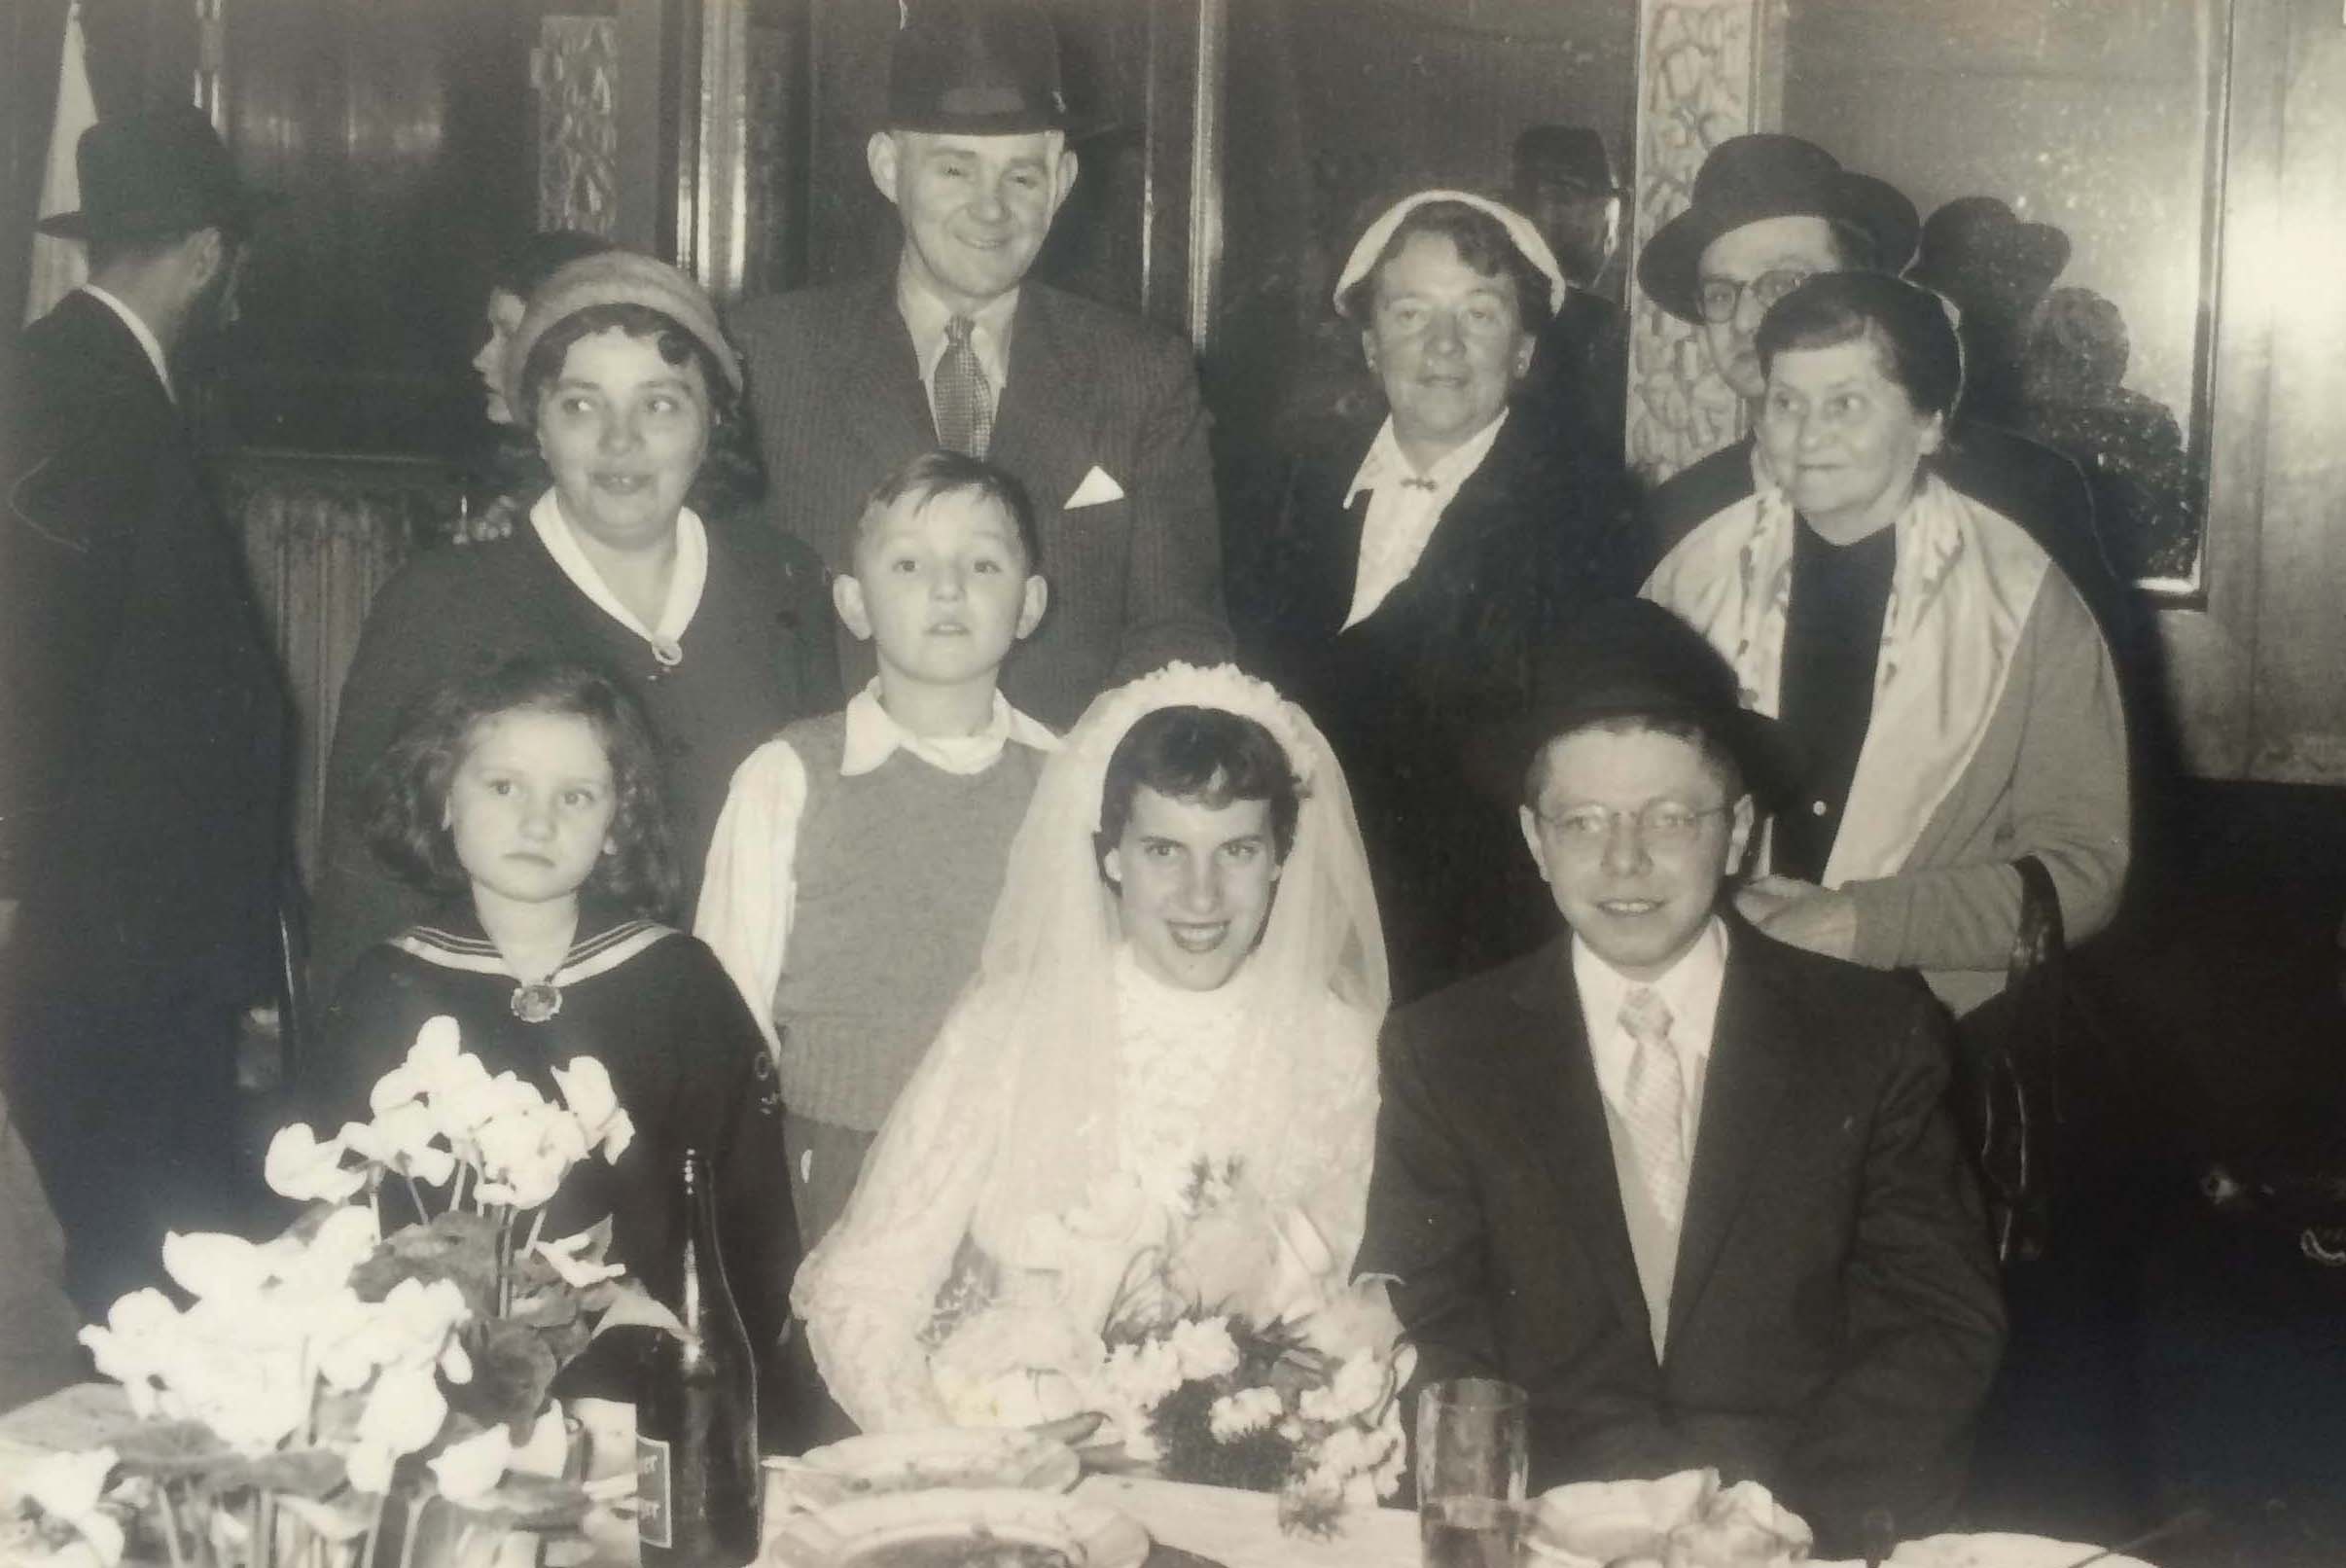 Safely in Vienna. Andor Platschek and his bride (seated) celebrate their wedding, with Piroska, Jeno, and Paul Lindenblatt in the background together with members of the bride’s family